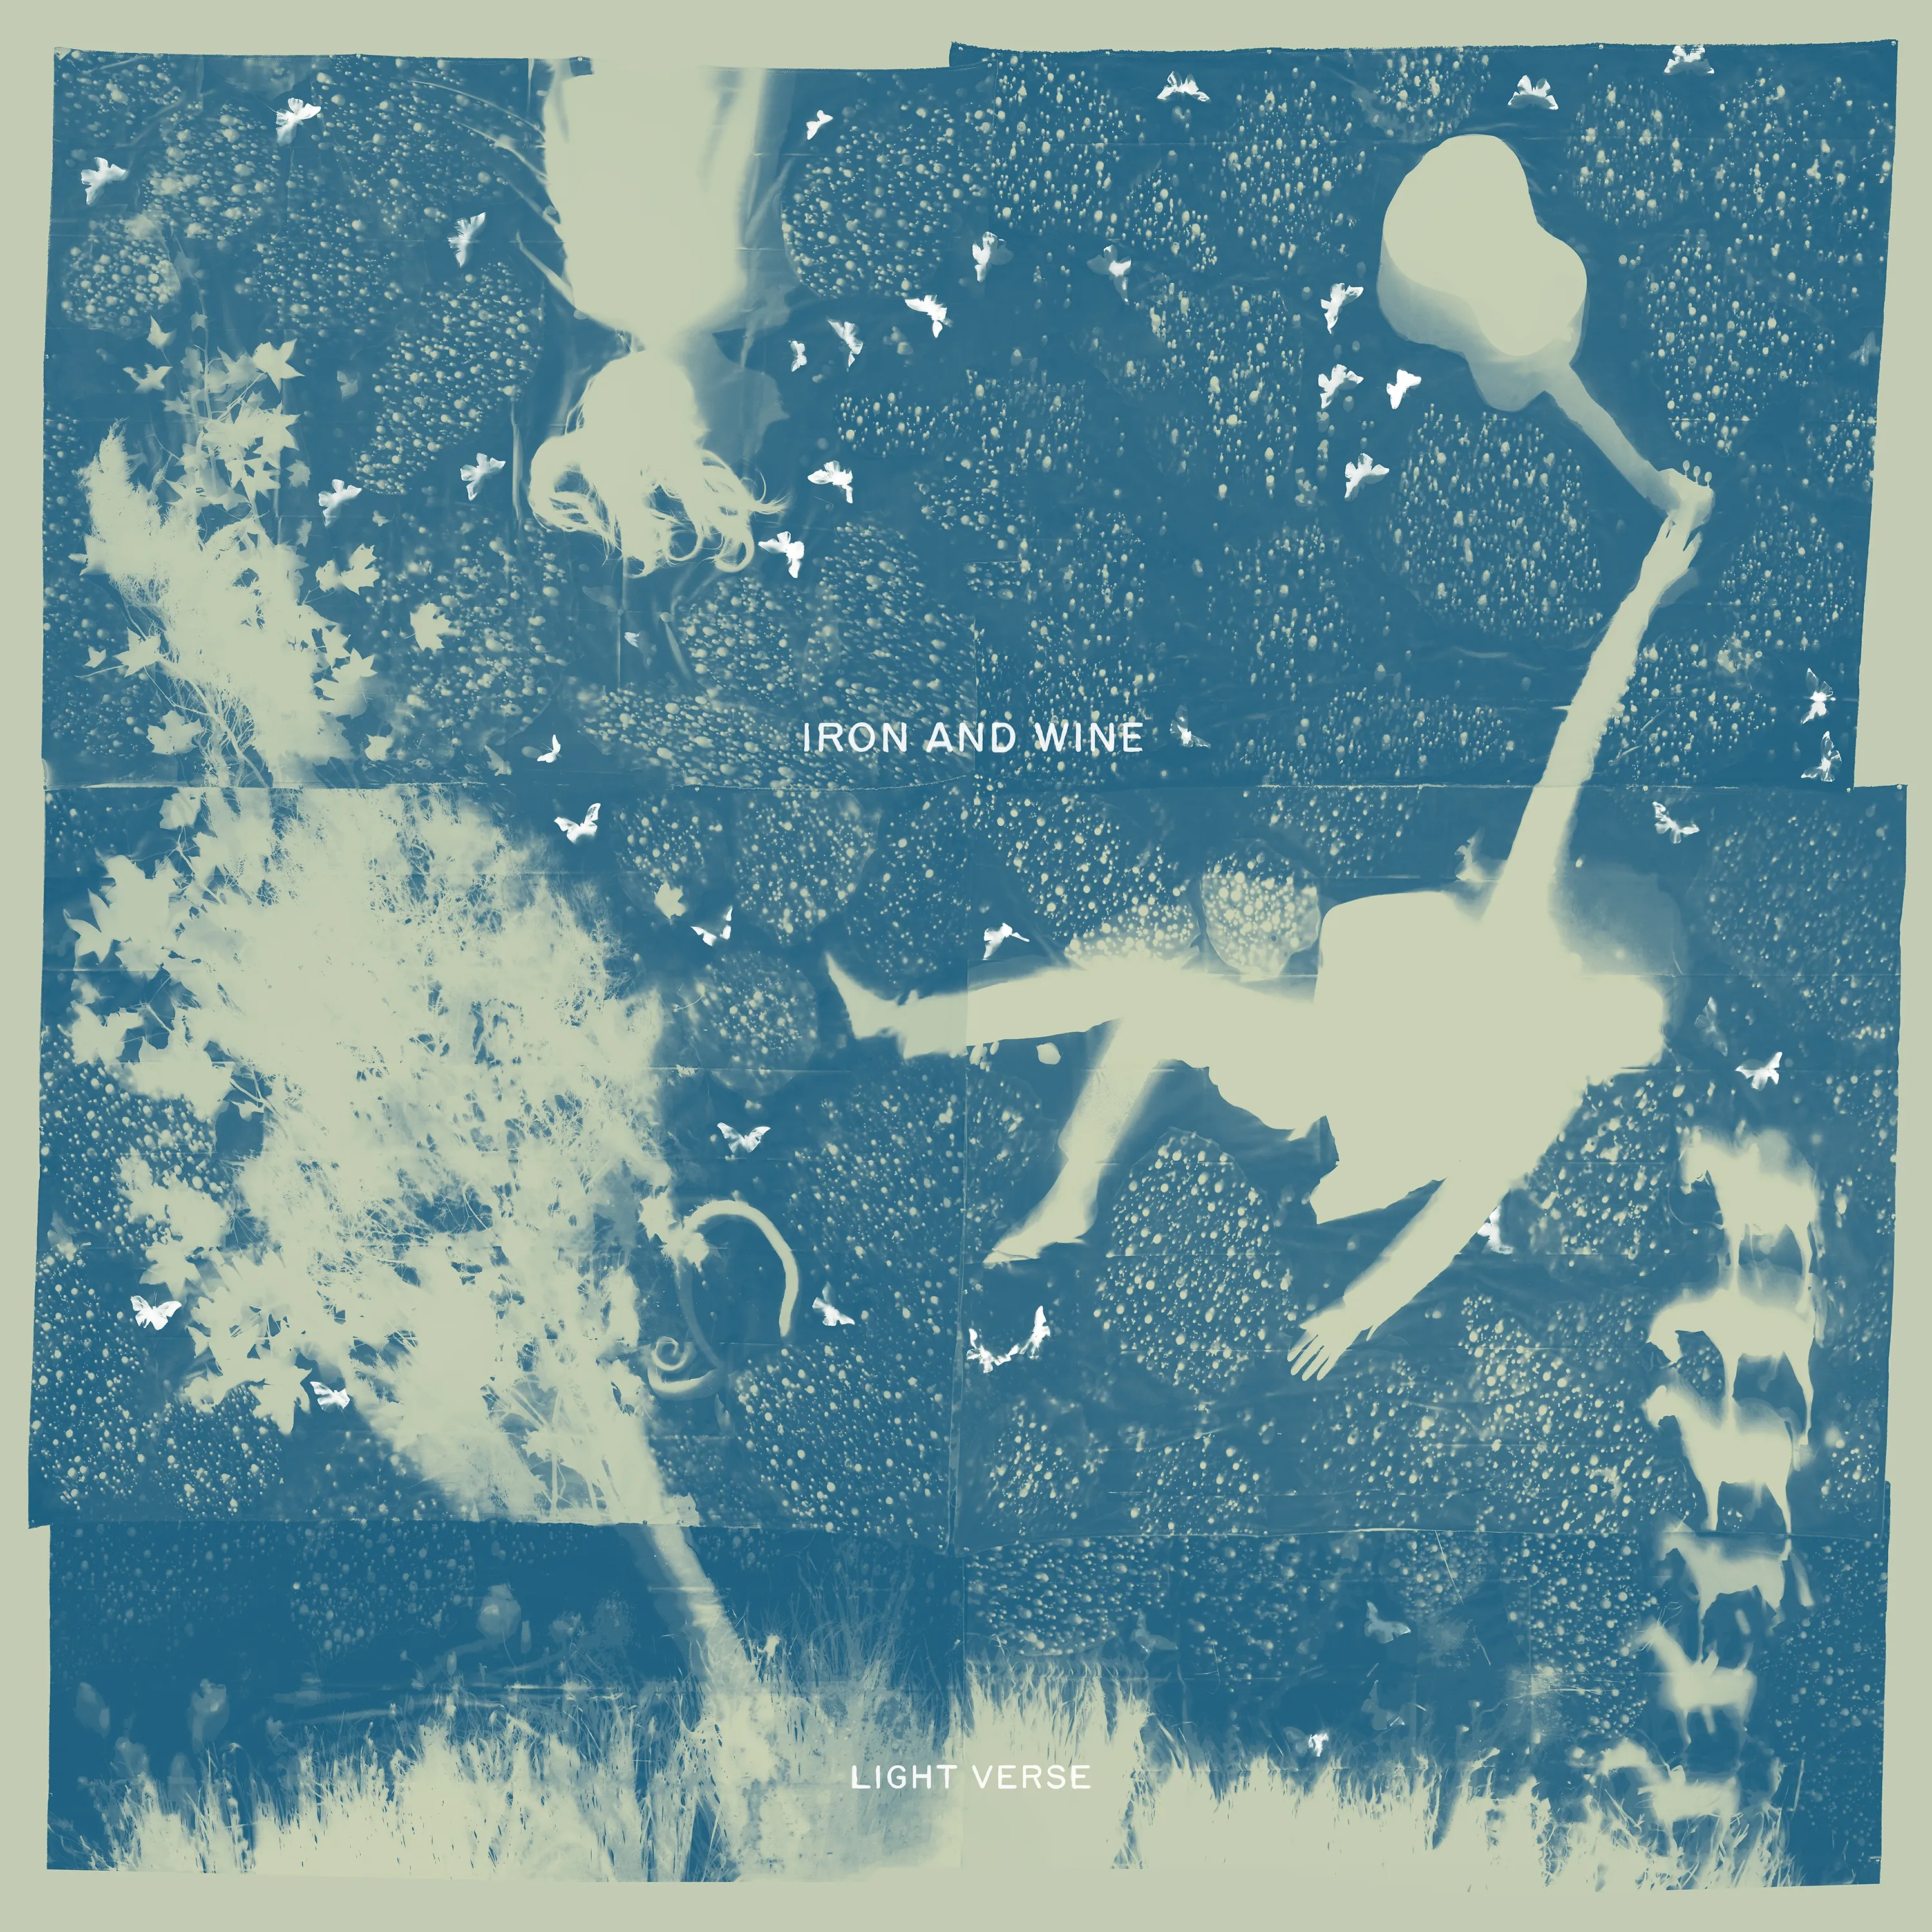 Light Verse album cover. A sea of light blue and white specs, some resembling birds and horses. The album title and band name are displayed in small text toward the center of the cover.